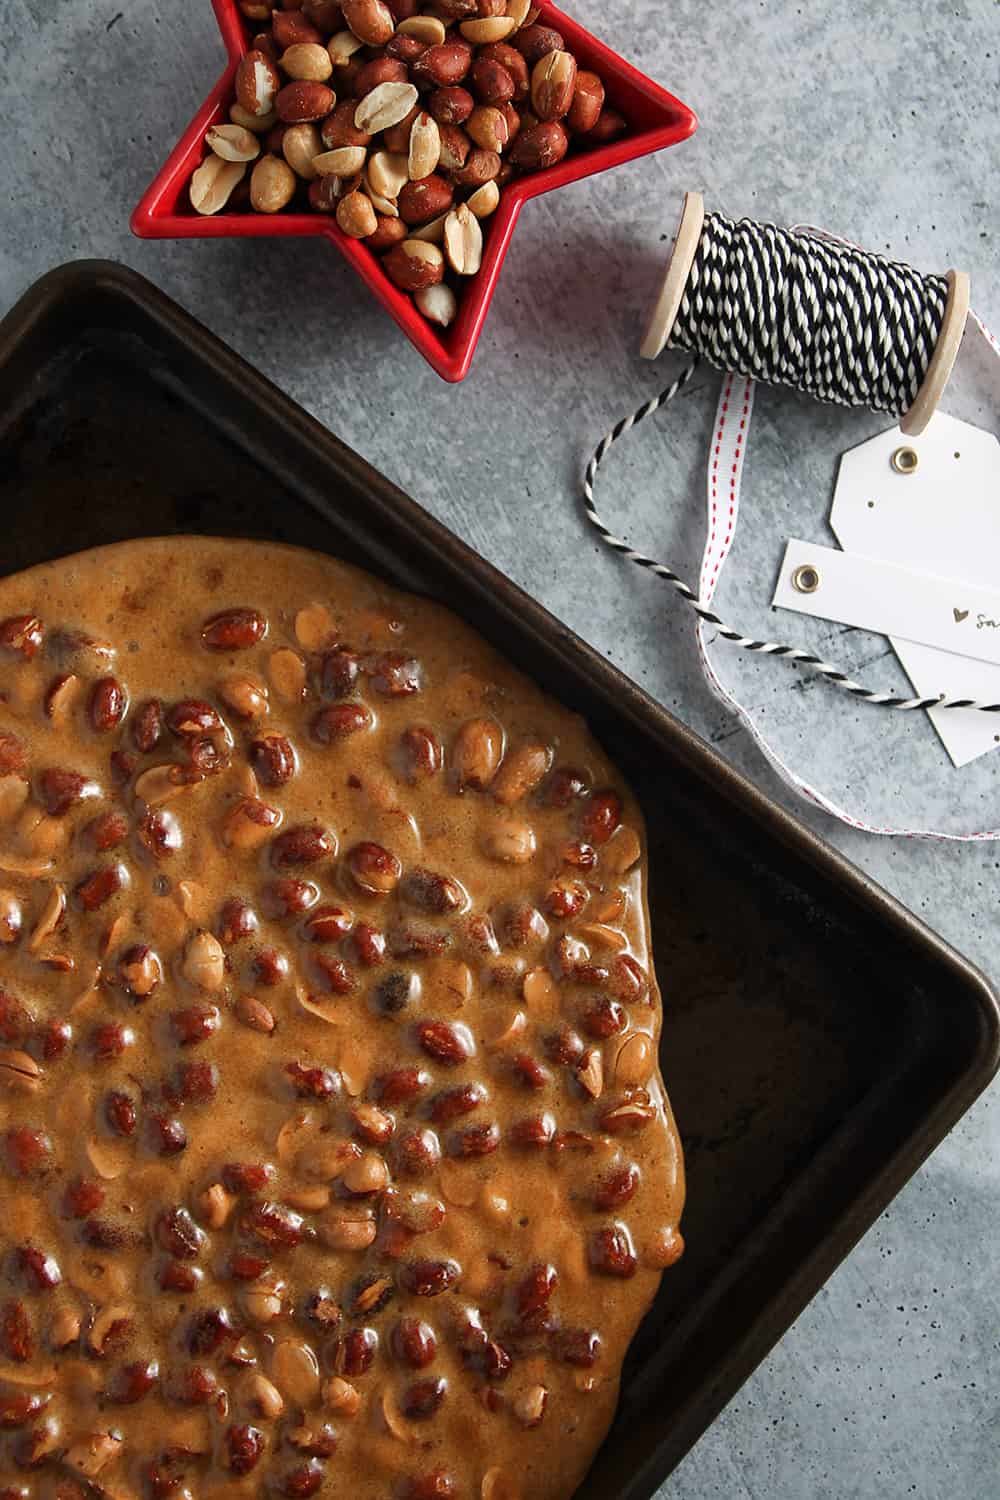 Homemade Peanut Brittle is a holiday classic that you'll make for years to come